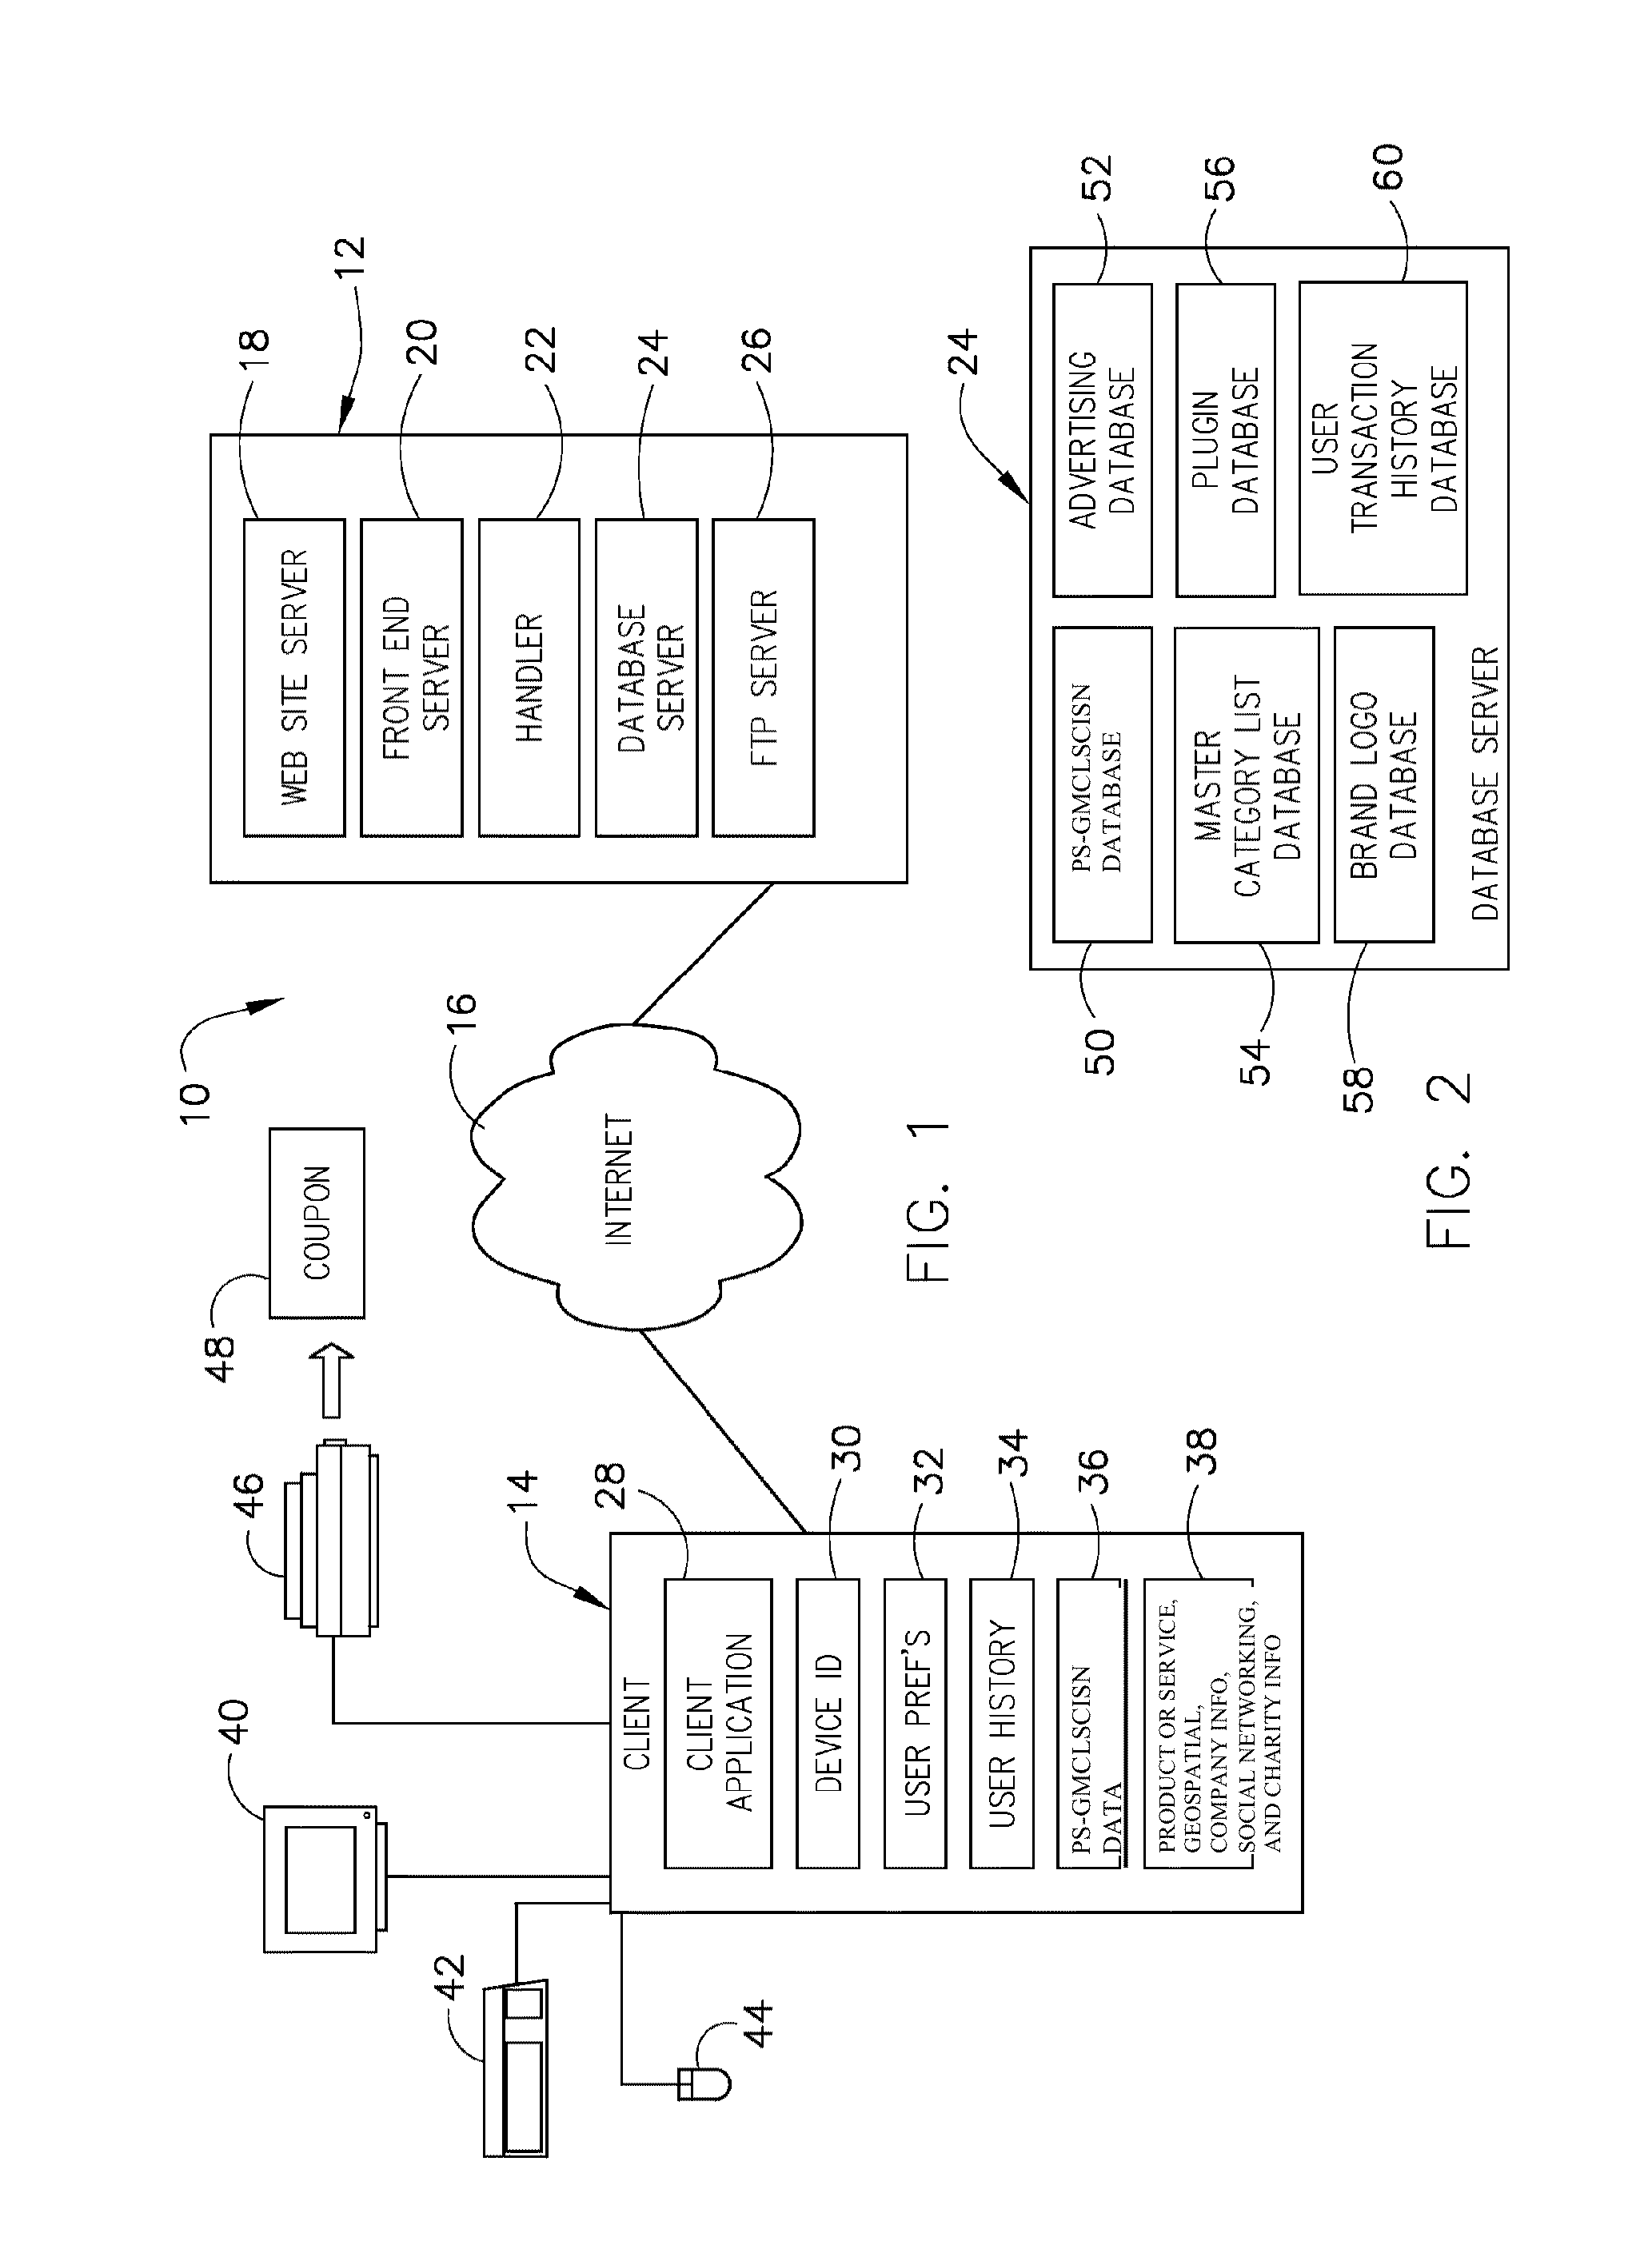 Mobile device system and method providing 3D geo-target location-based mobile commerce searching/purchases, discounts/coupons products, goods, and services, and social networking